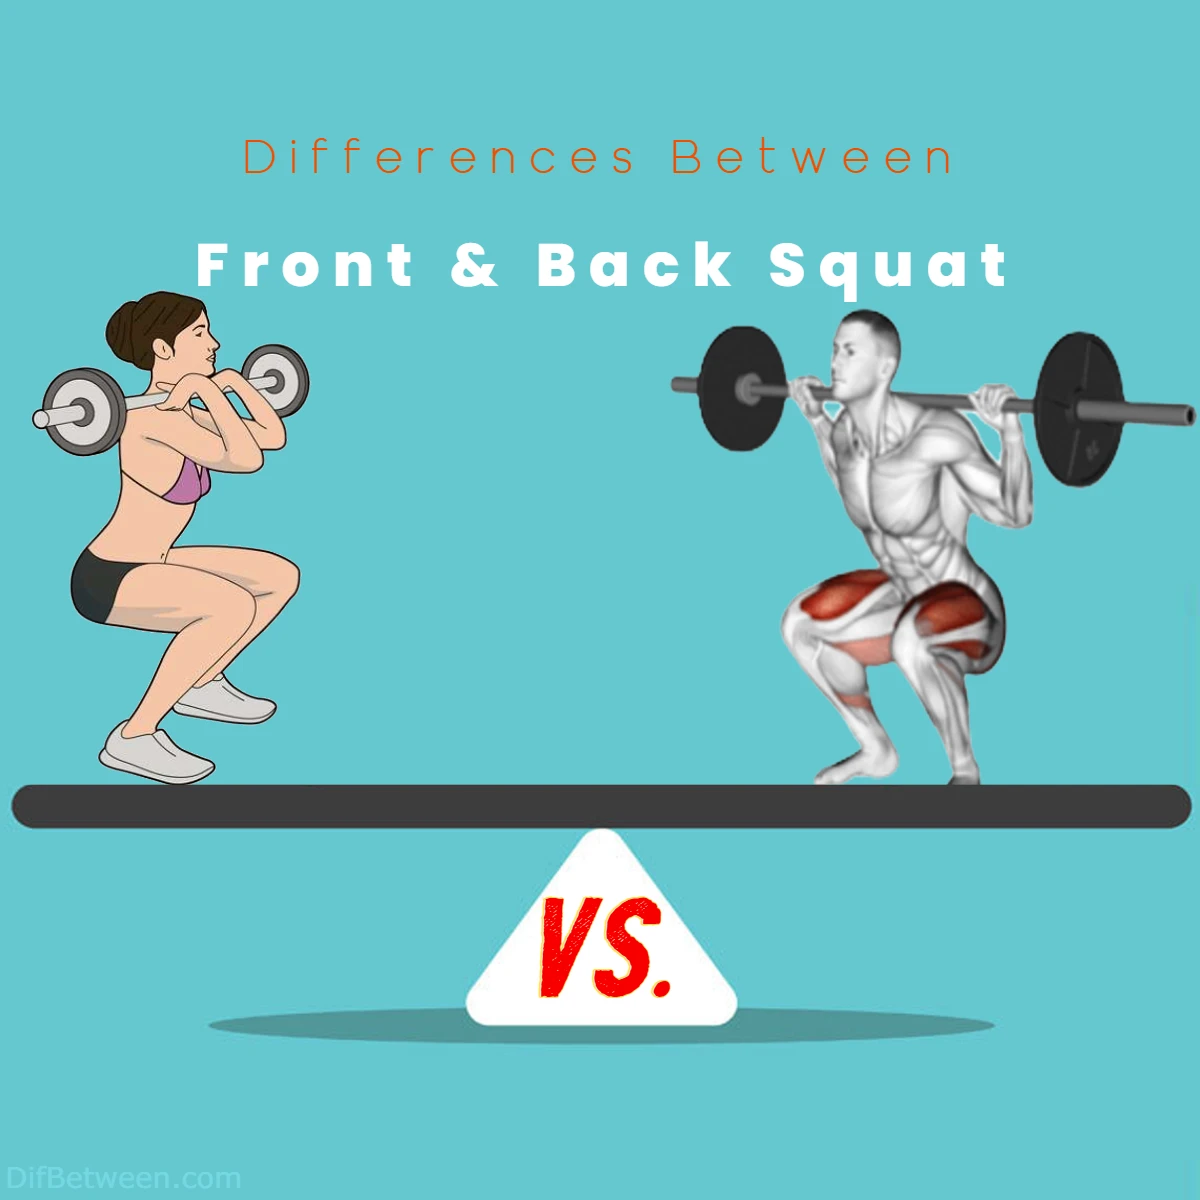 Differences Between Back Squat and Front Squat